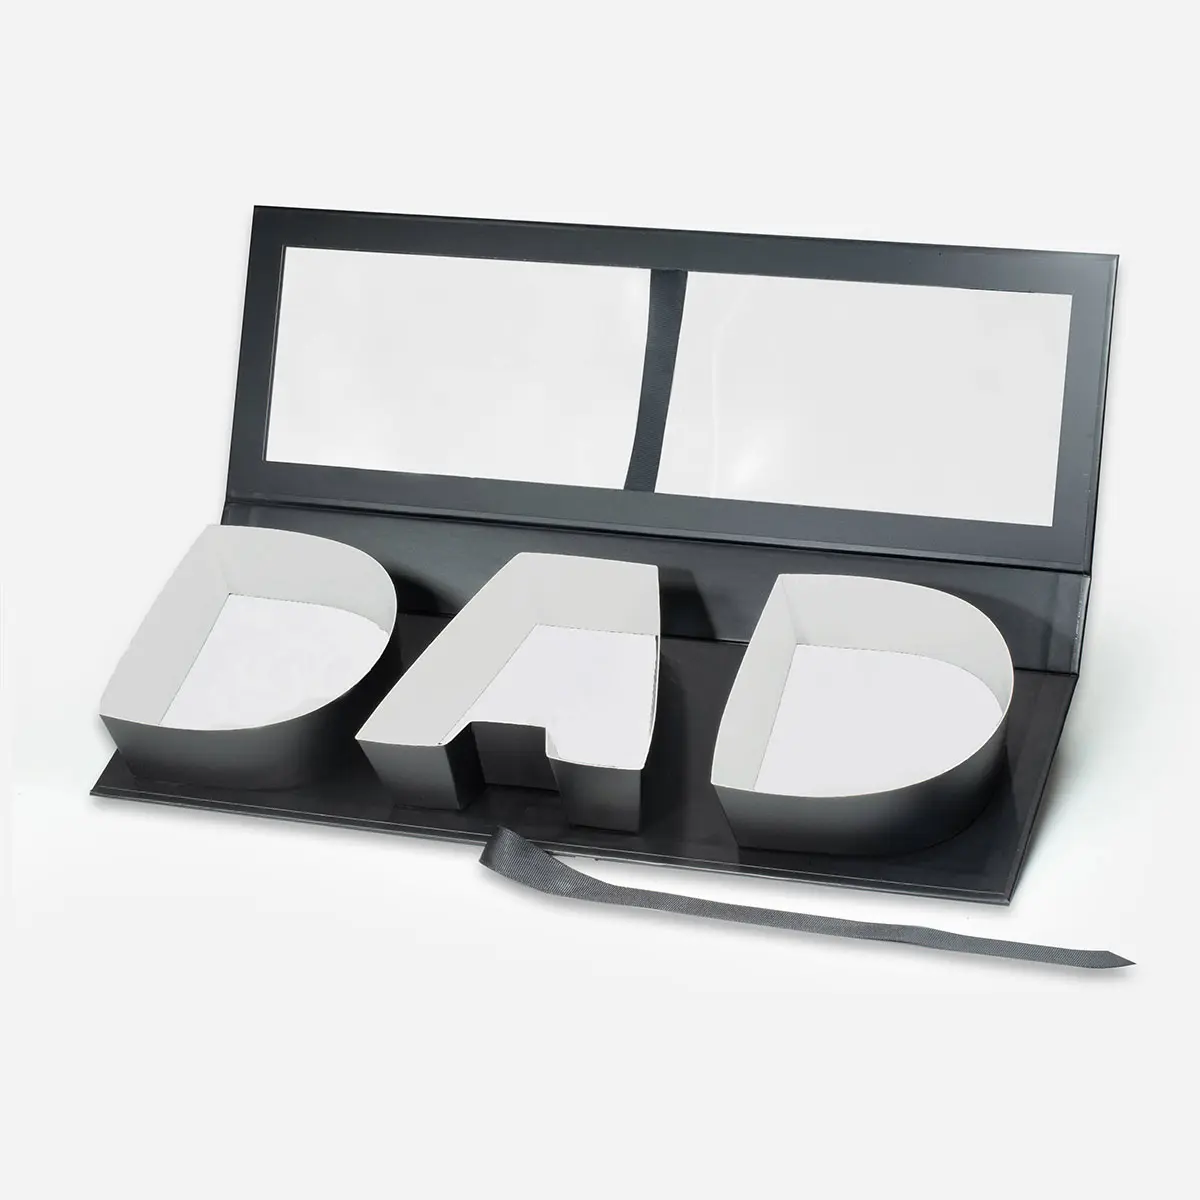 Black Father’s Day Dad Gift Box with Window